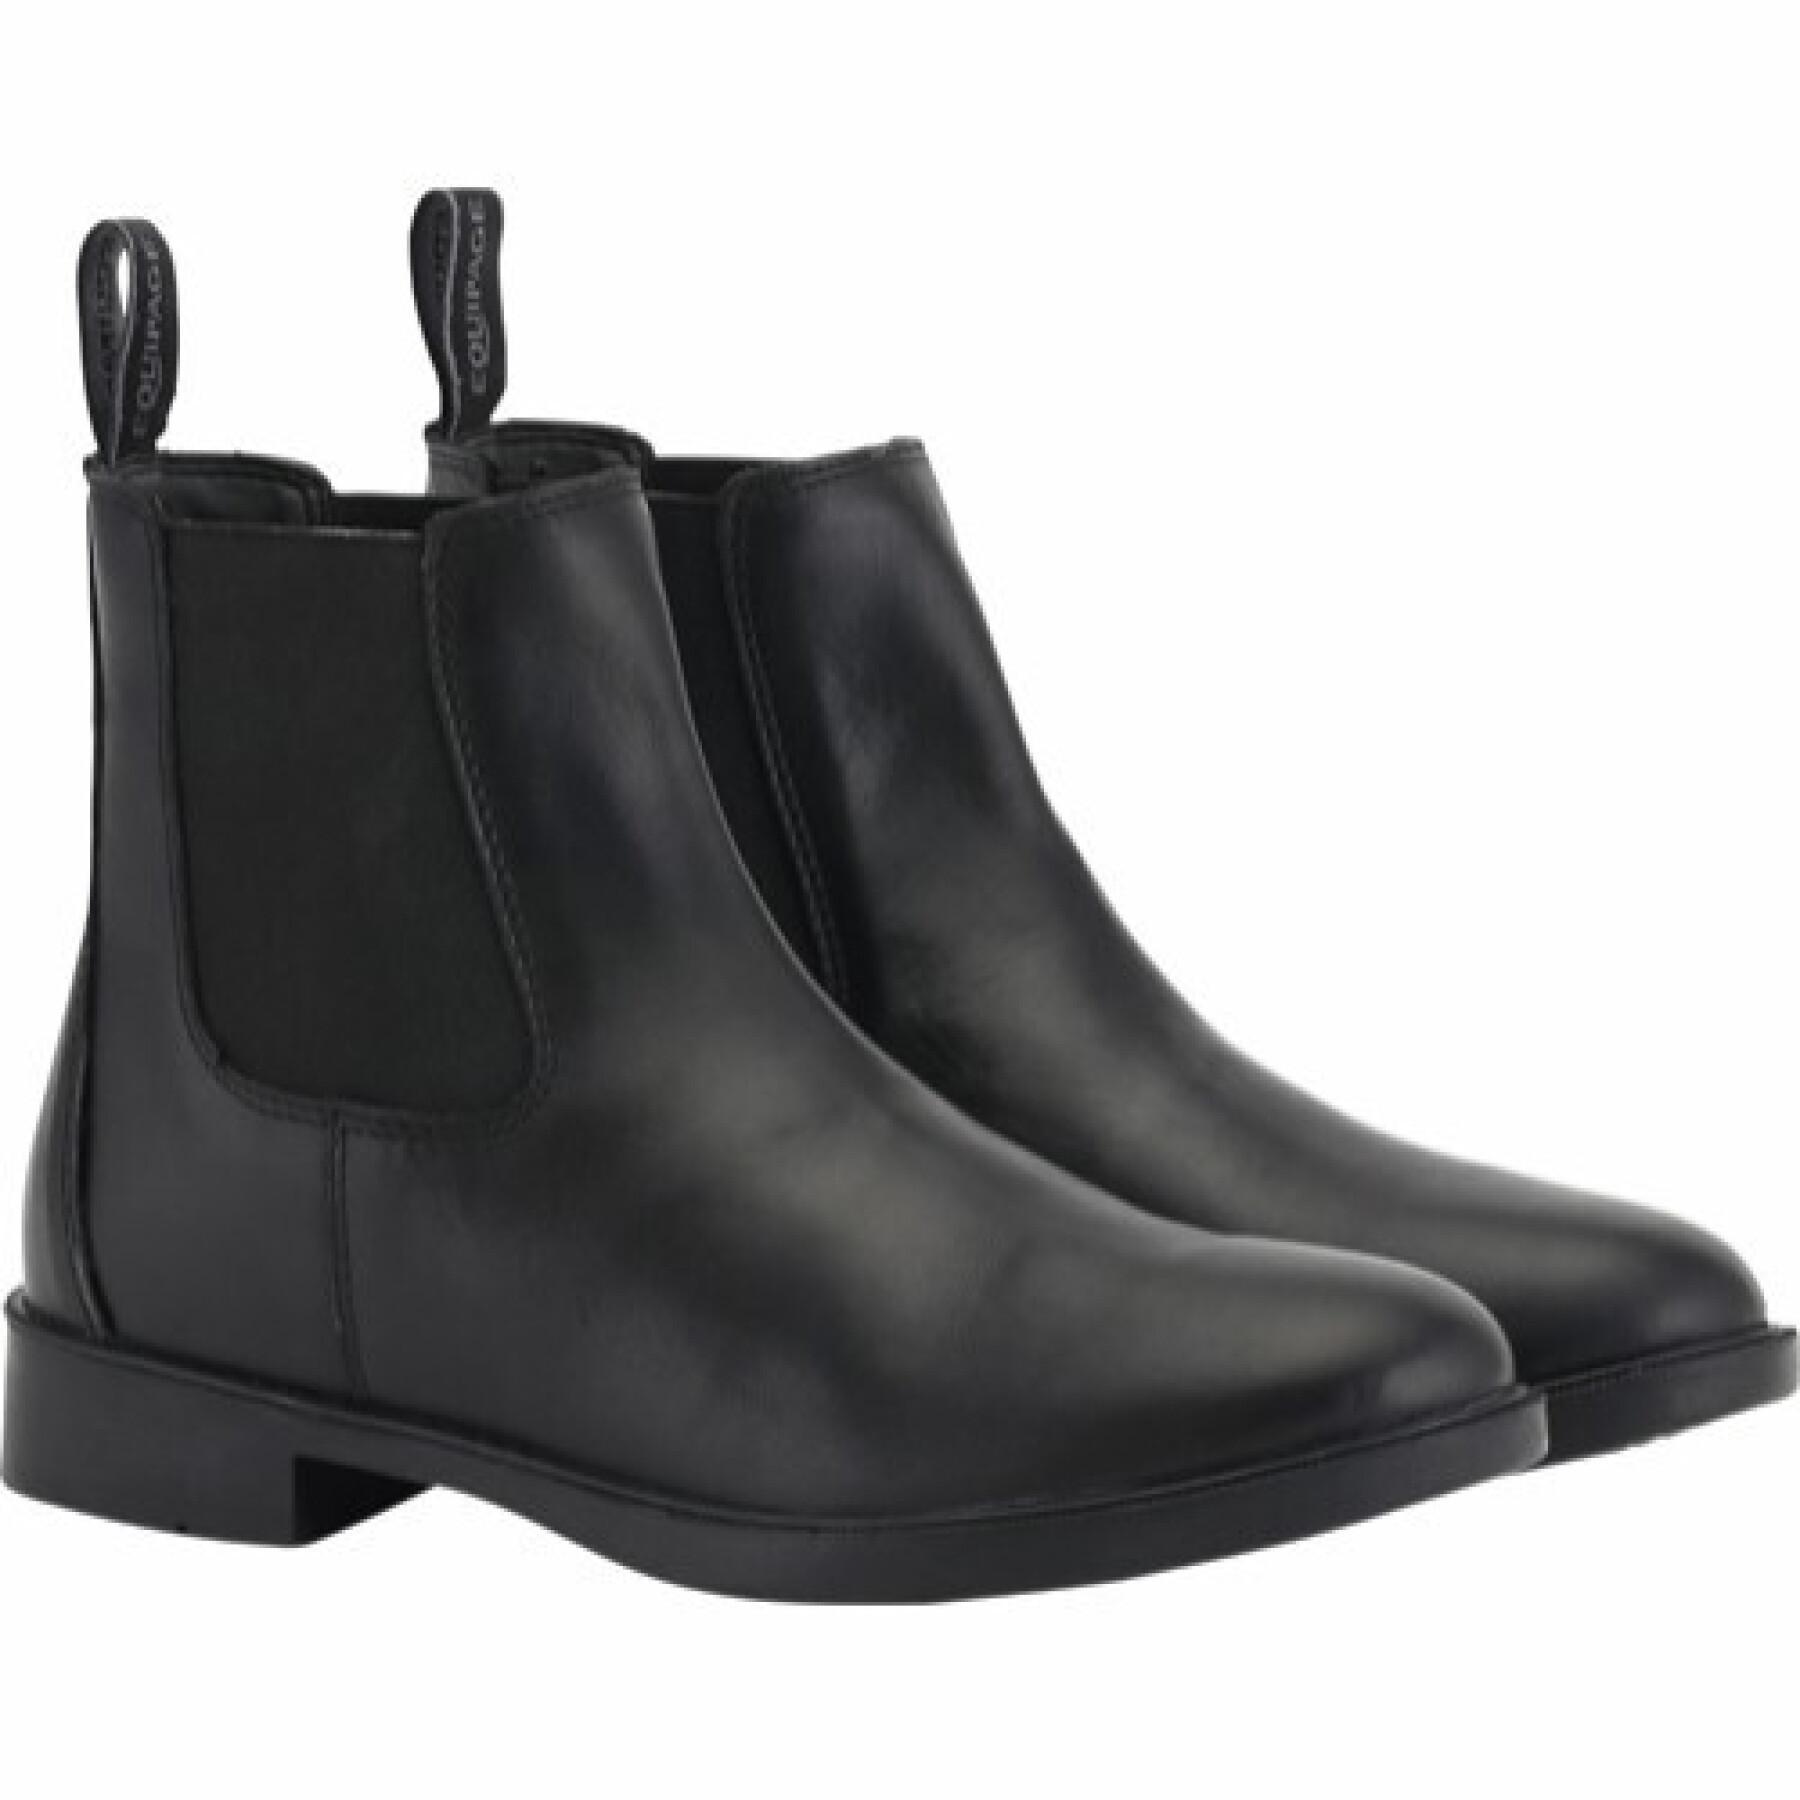 Girl's riding boots Equipage Bari